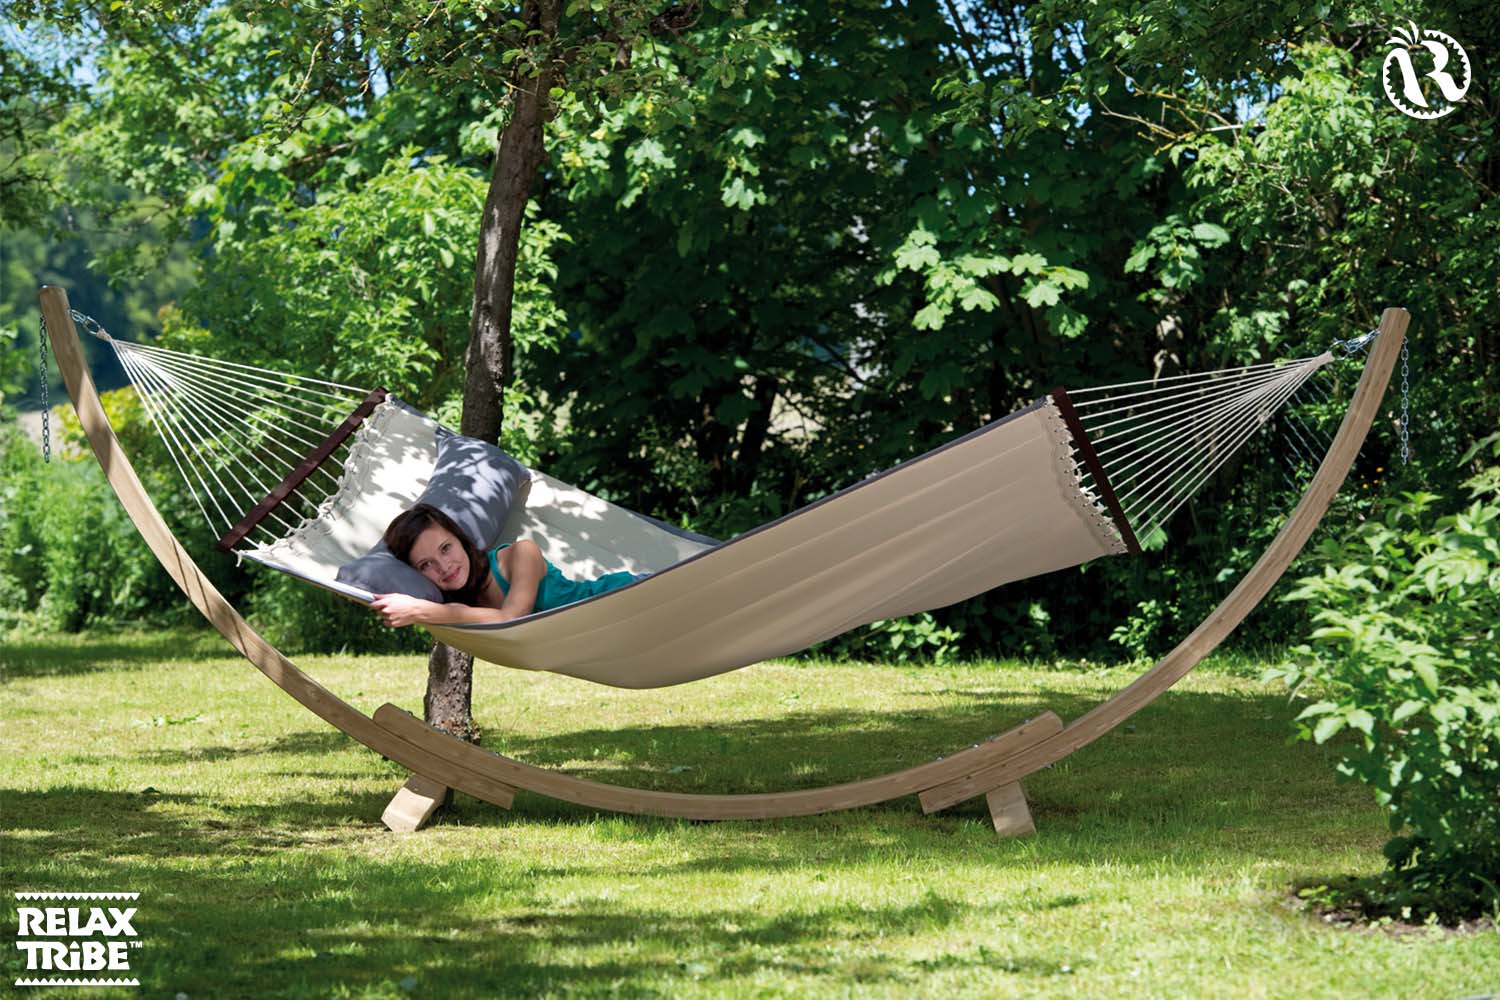 apollo-fsc-wood-stand-for-hammock-length-250-330cm-max-160kg-home-garden-weatherproof-natural-and-american-dream-sand